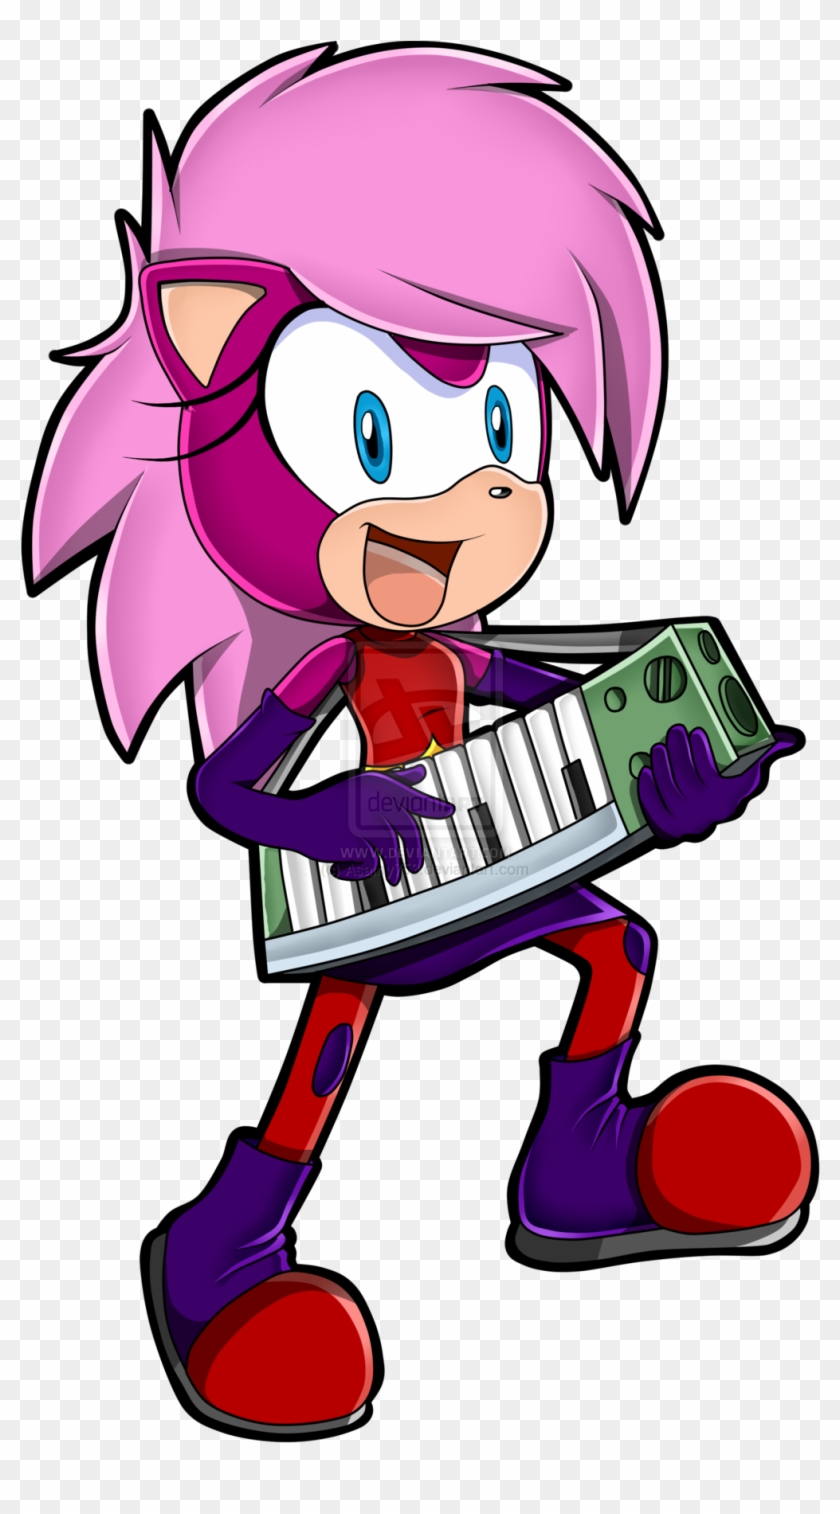 Sonic Underground By Asamy753 - Sonia The Hedgehog Sonic Boom #797844